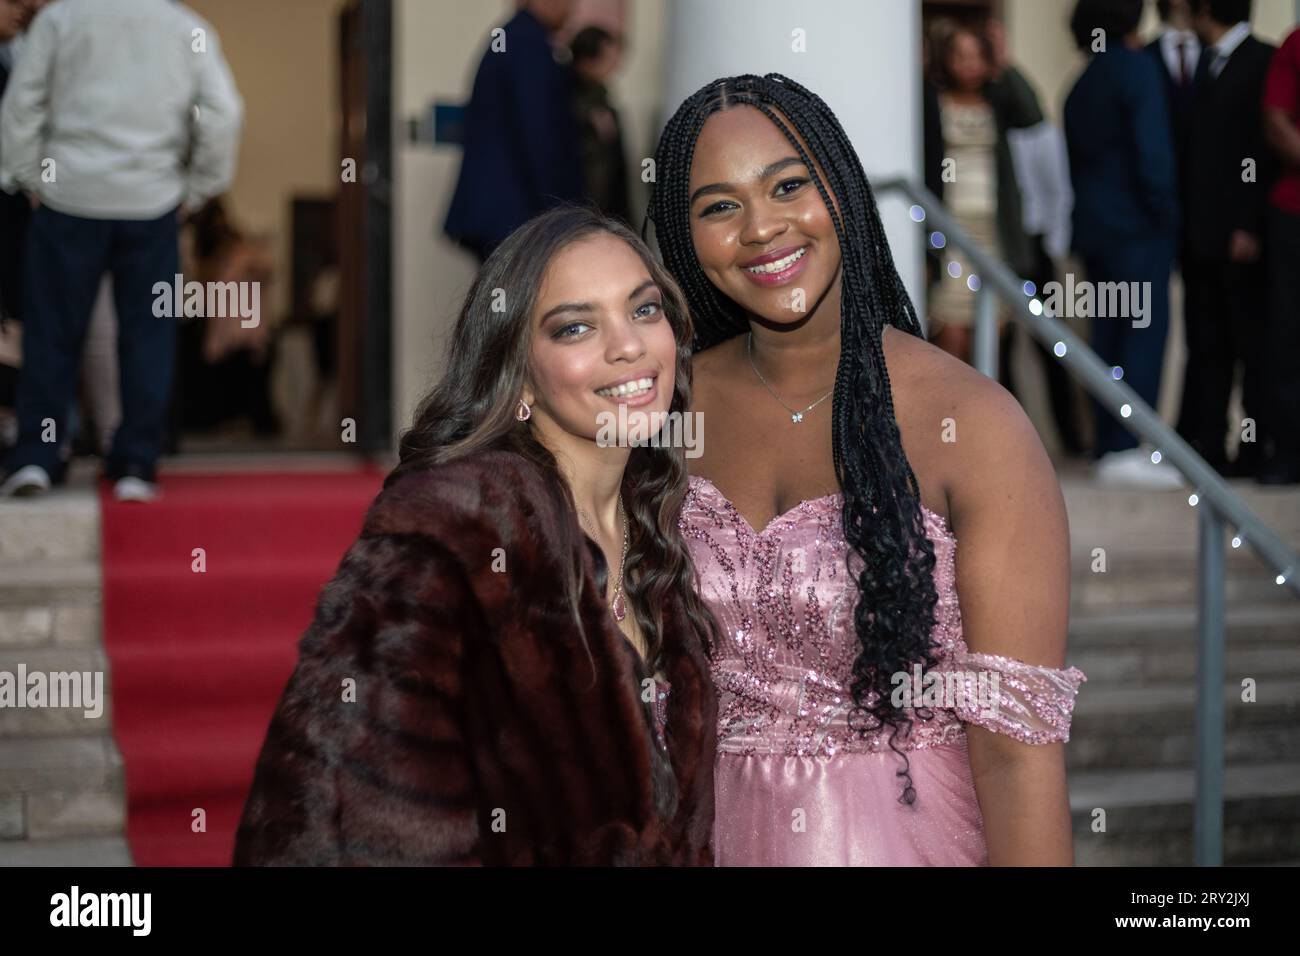 In a close-up shot at the prom, two multiracial friends stand confidently on a red-carpeted staircase, radiating elegance and camaraderie. Stock Photo